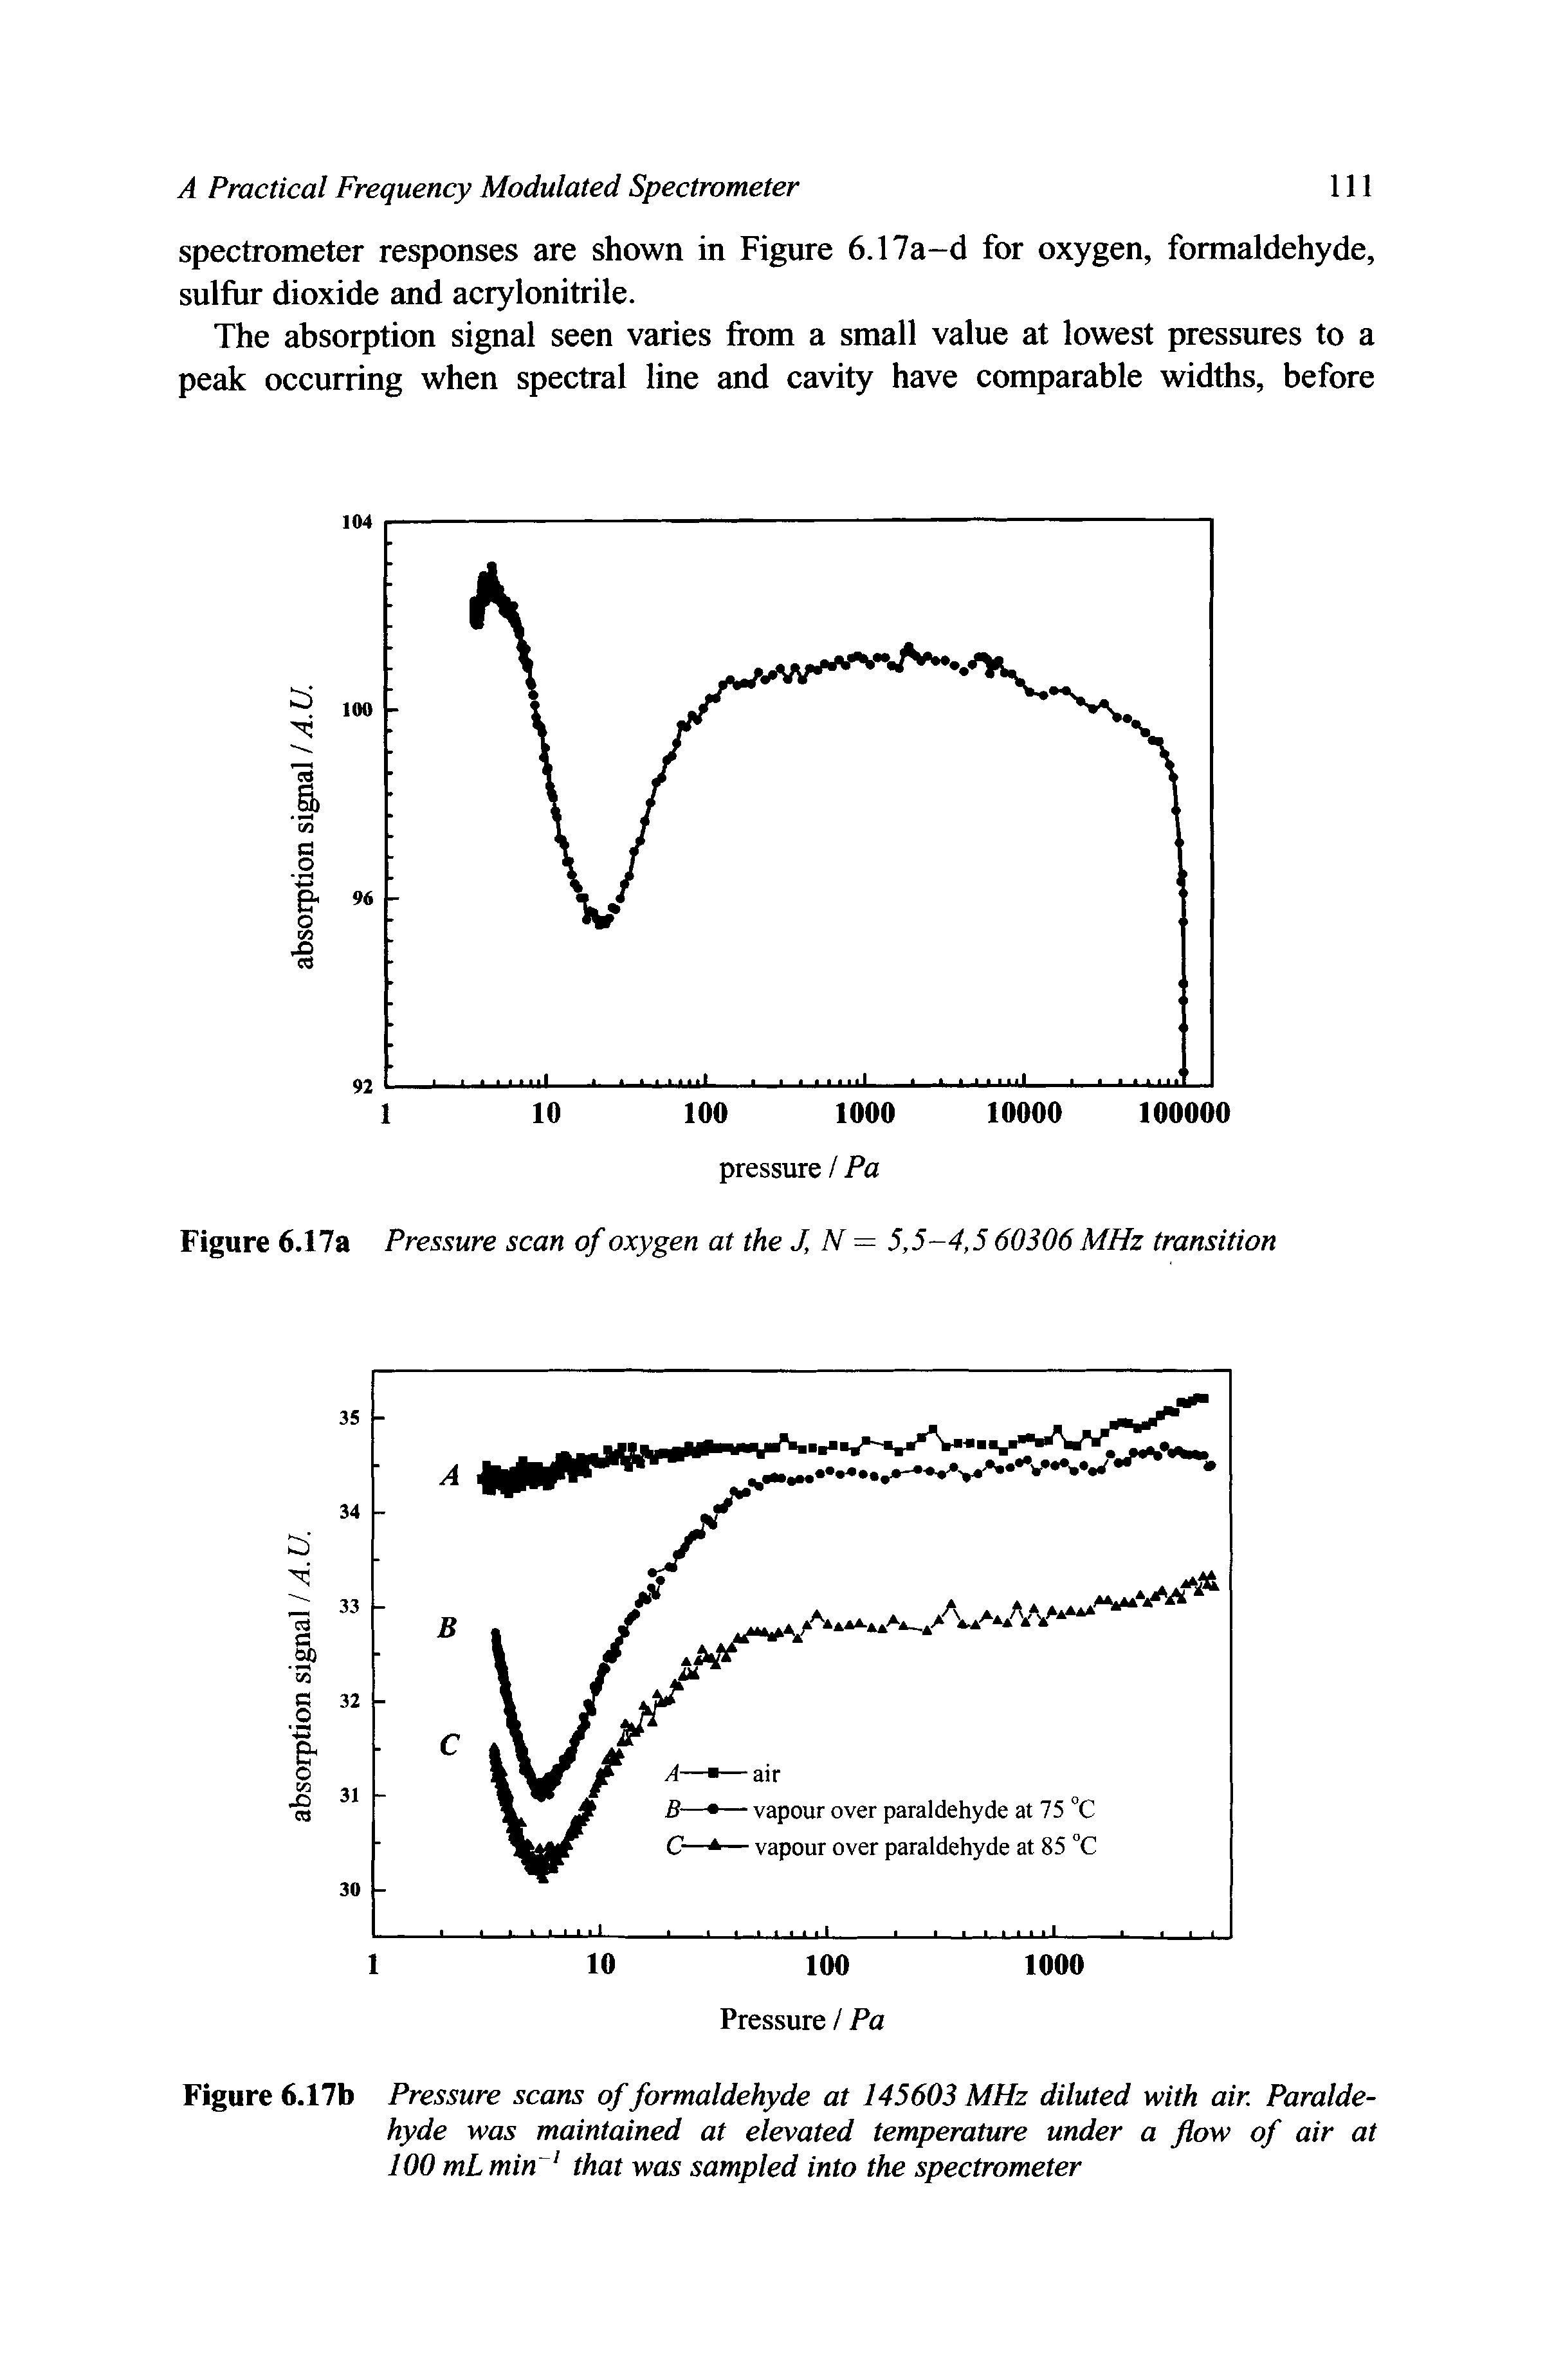 Figure 6.17b Pressure scans of formaldehyde at 145603 MHz diluted with air. Paraldehyde was maintained at elevated temperature under a flow of air at 100 mLmin that was sampled into the spectrometer...